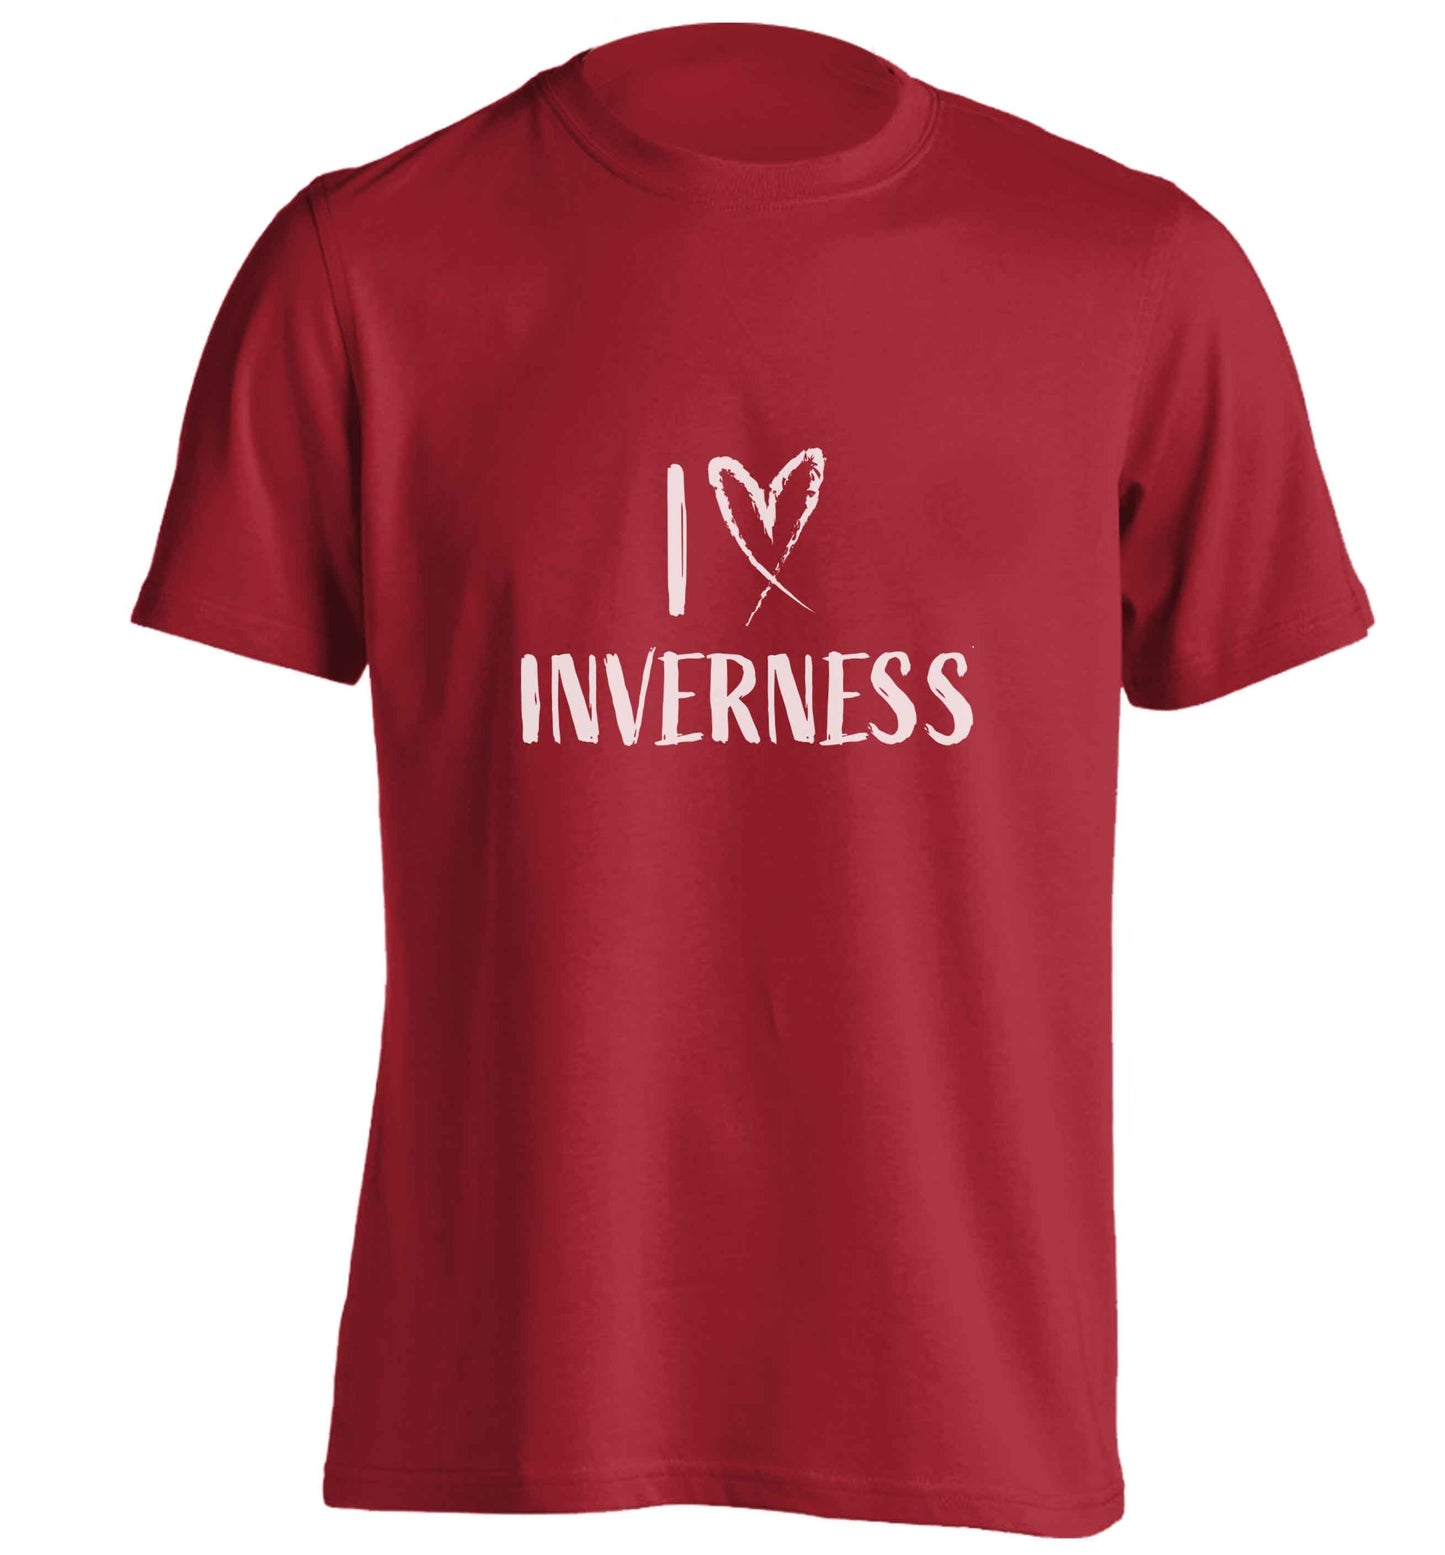 I love Inverness adults unisex red Tshirt 2XL